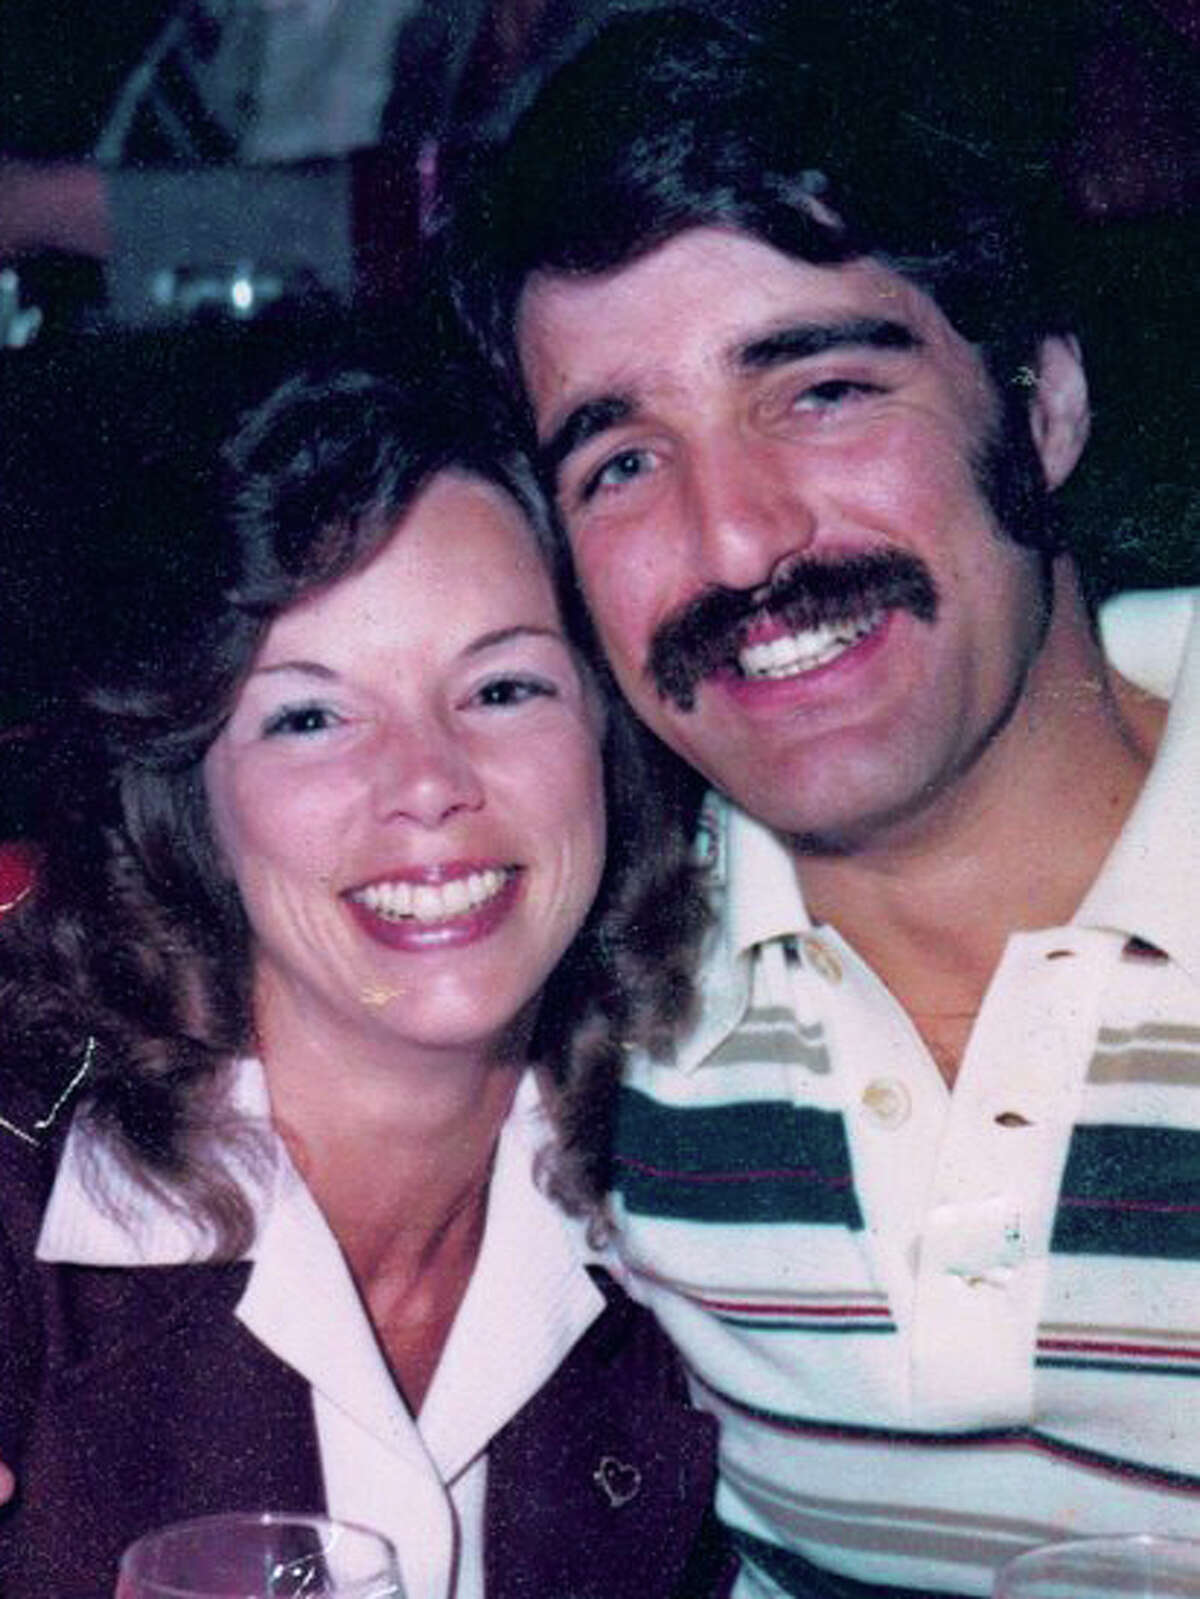 Cheri Domingo, 35, and Greg Sanchez, 27, were murdered in a home near Goleta in 1981. Joseph DeAngelo has been charged with their murders by the Santa Barbara District Attorney's office. DeAngelo has also been charged in the deaths of Alexandria Manning and Robert Offerman on Dec. 7, 1979